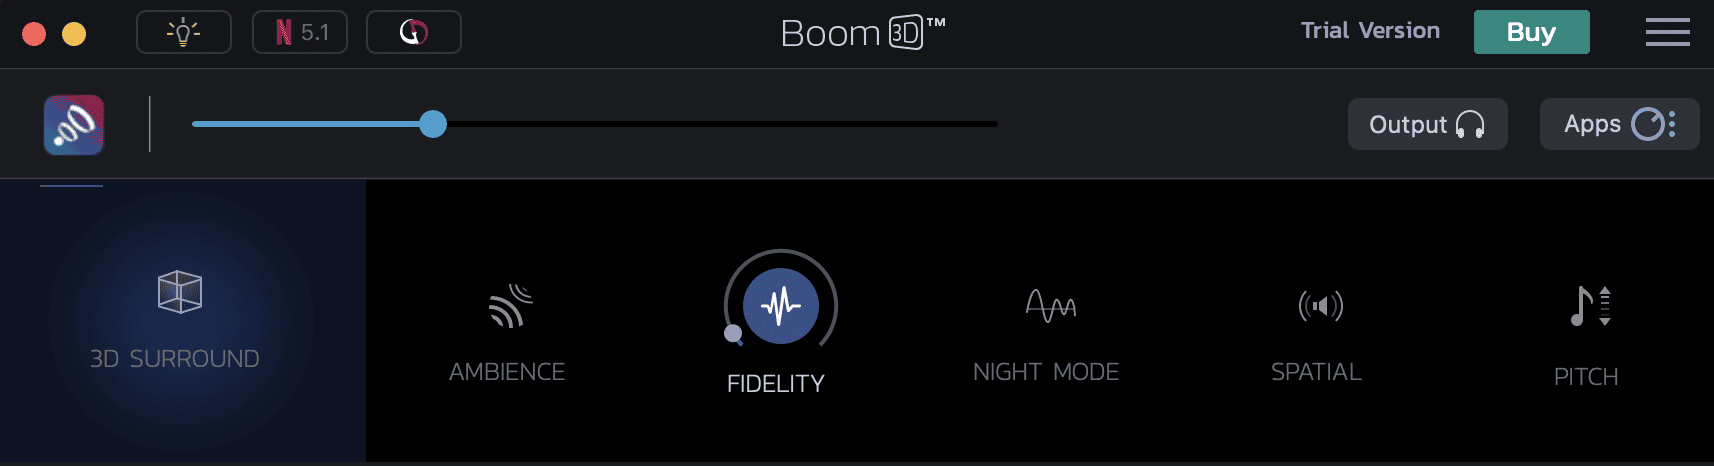 The Quick Sound adjustment settings in the Boom3D macOS app